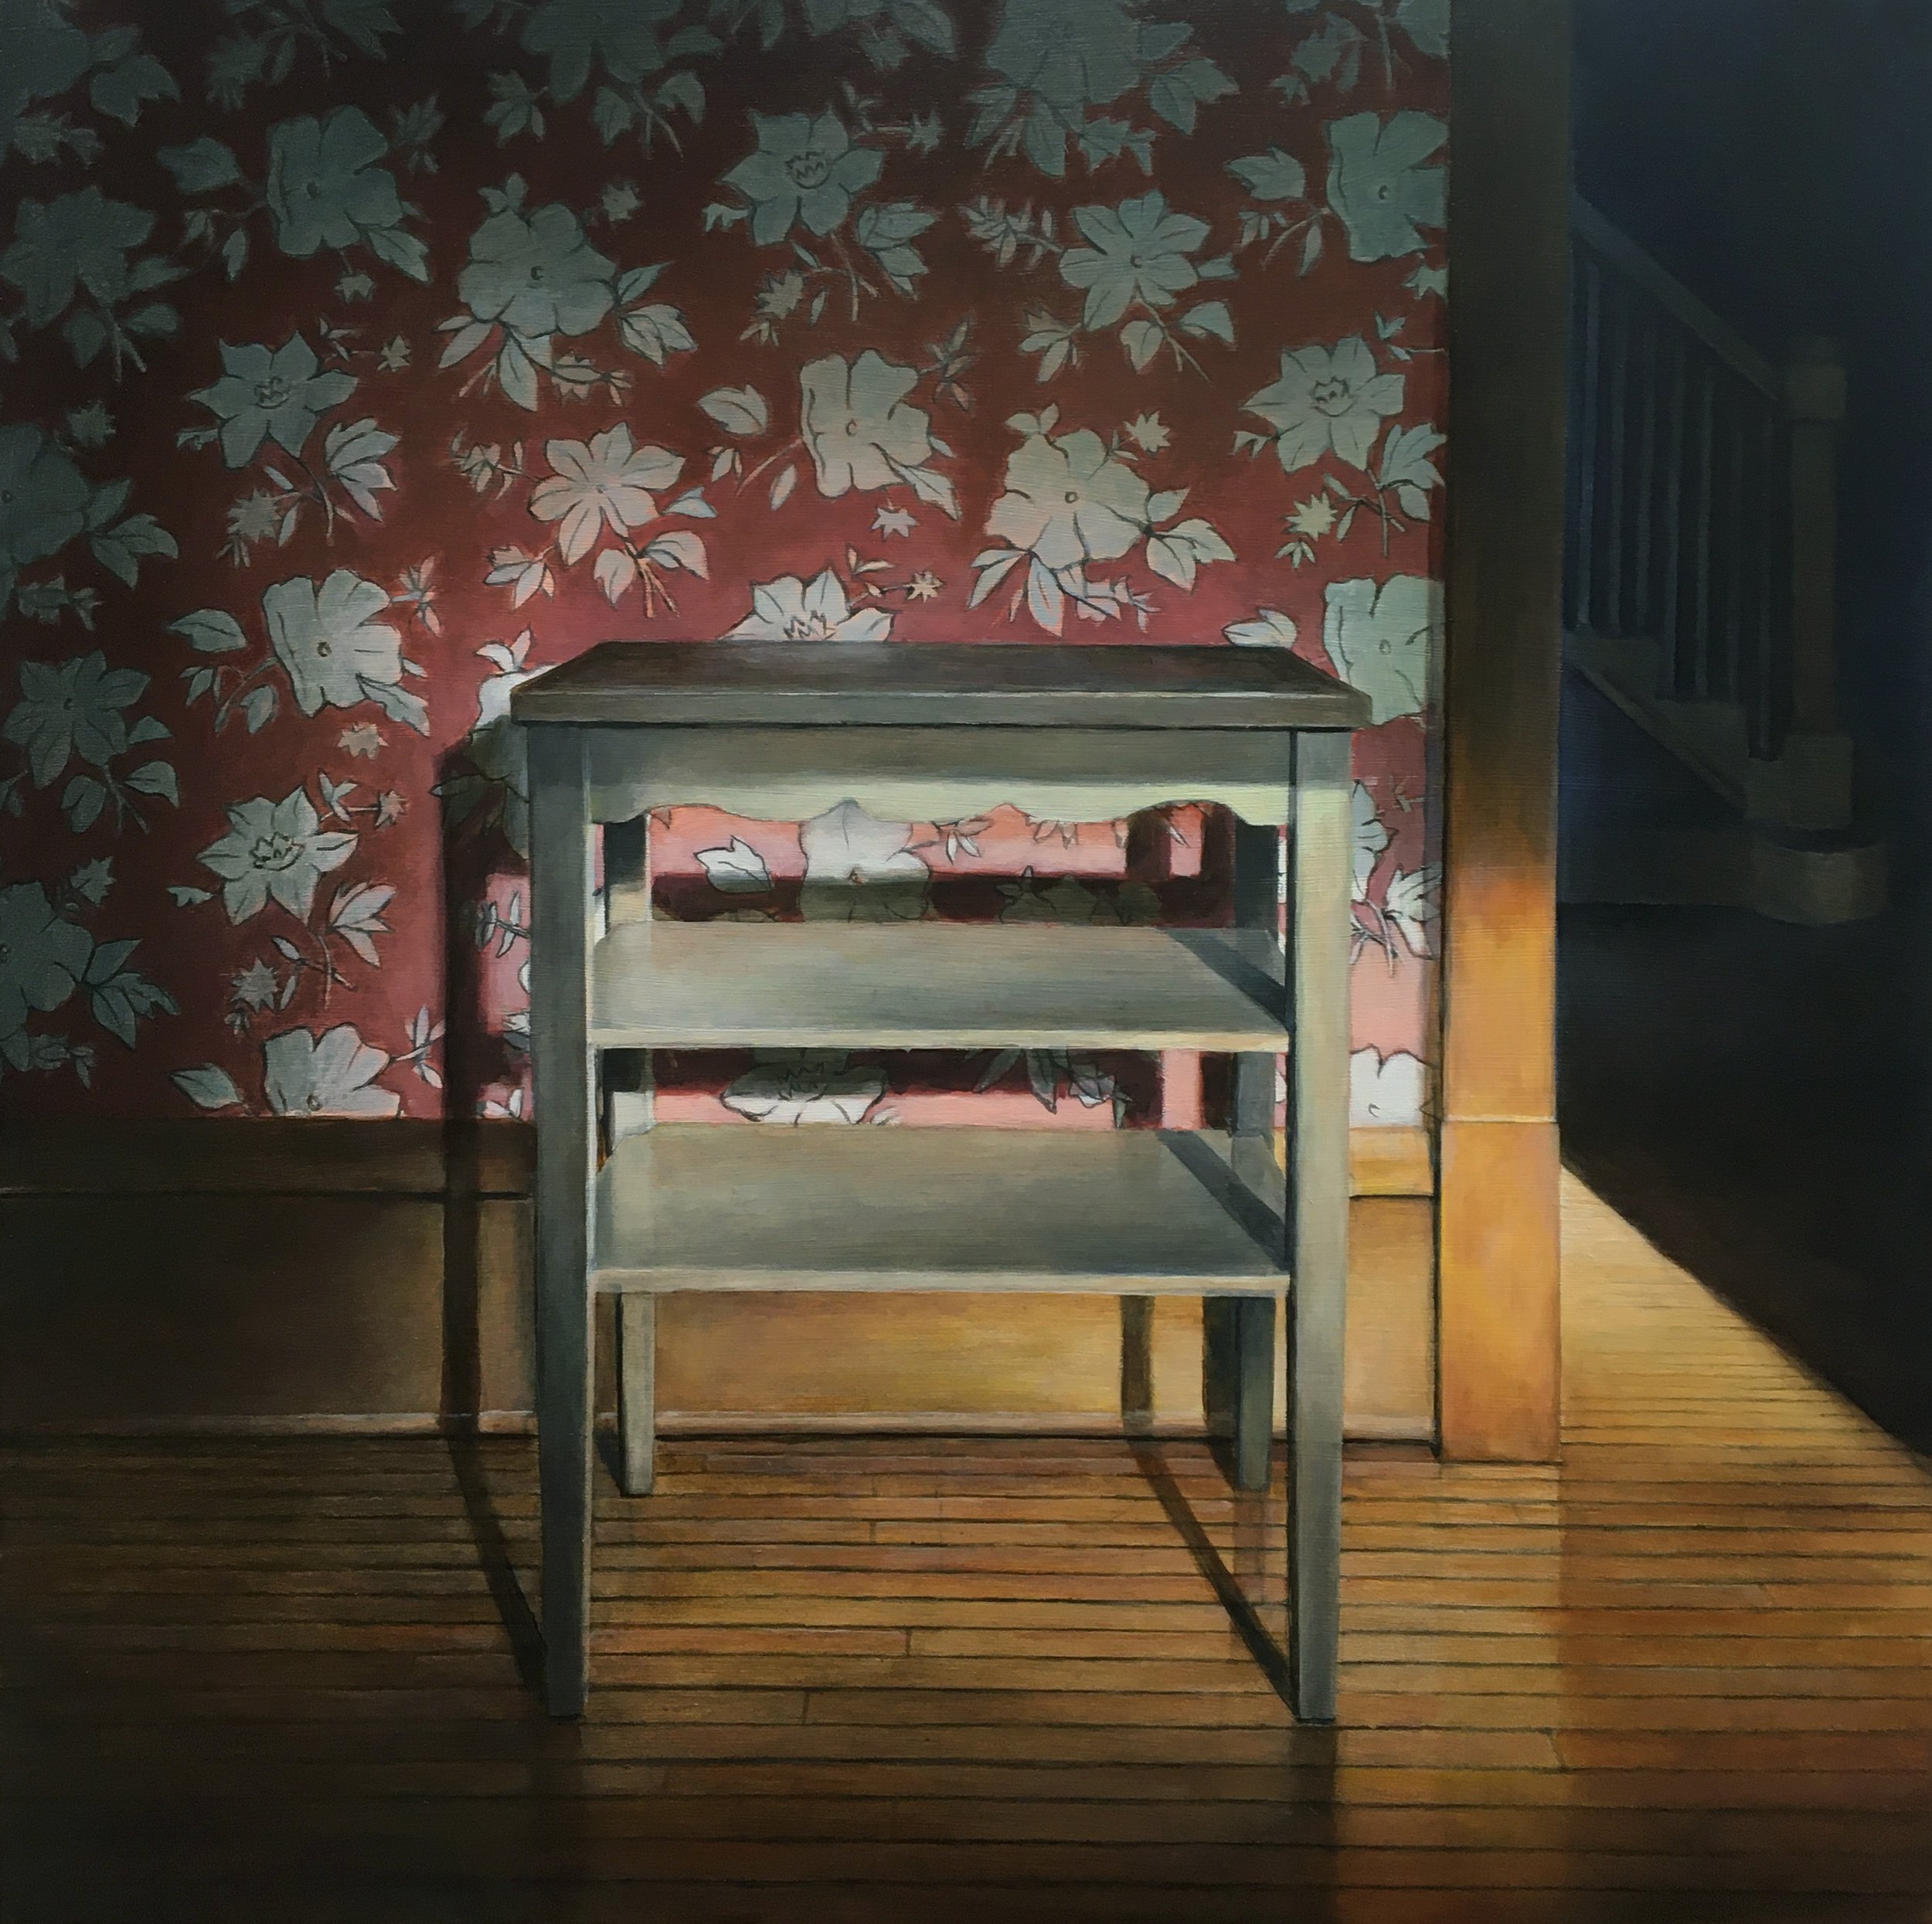   Wallpaper and Empty Shelf   2020  Oil on panel  16 x 16 inches   